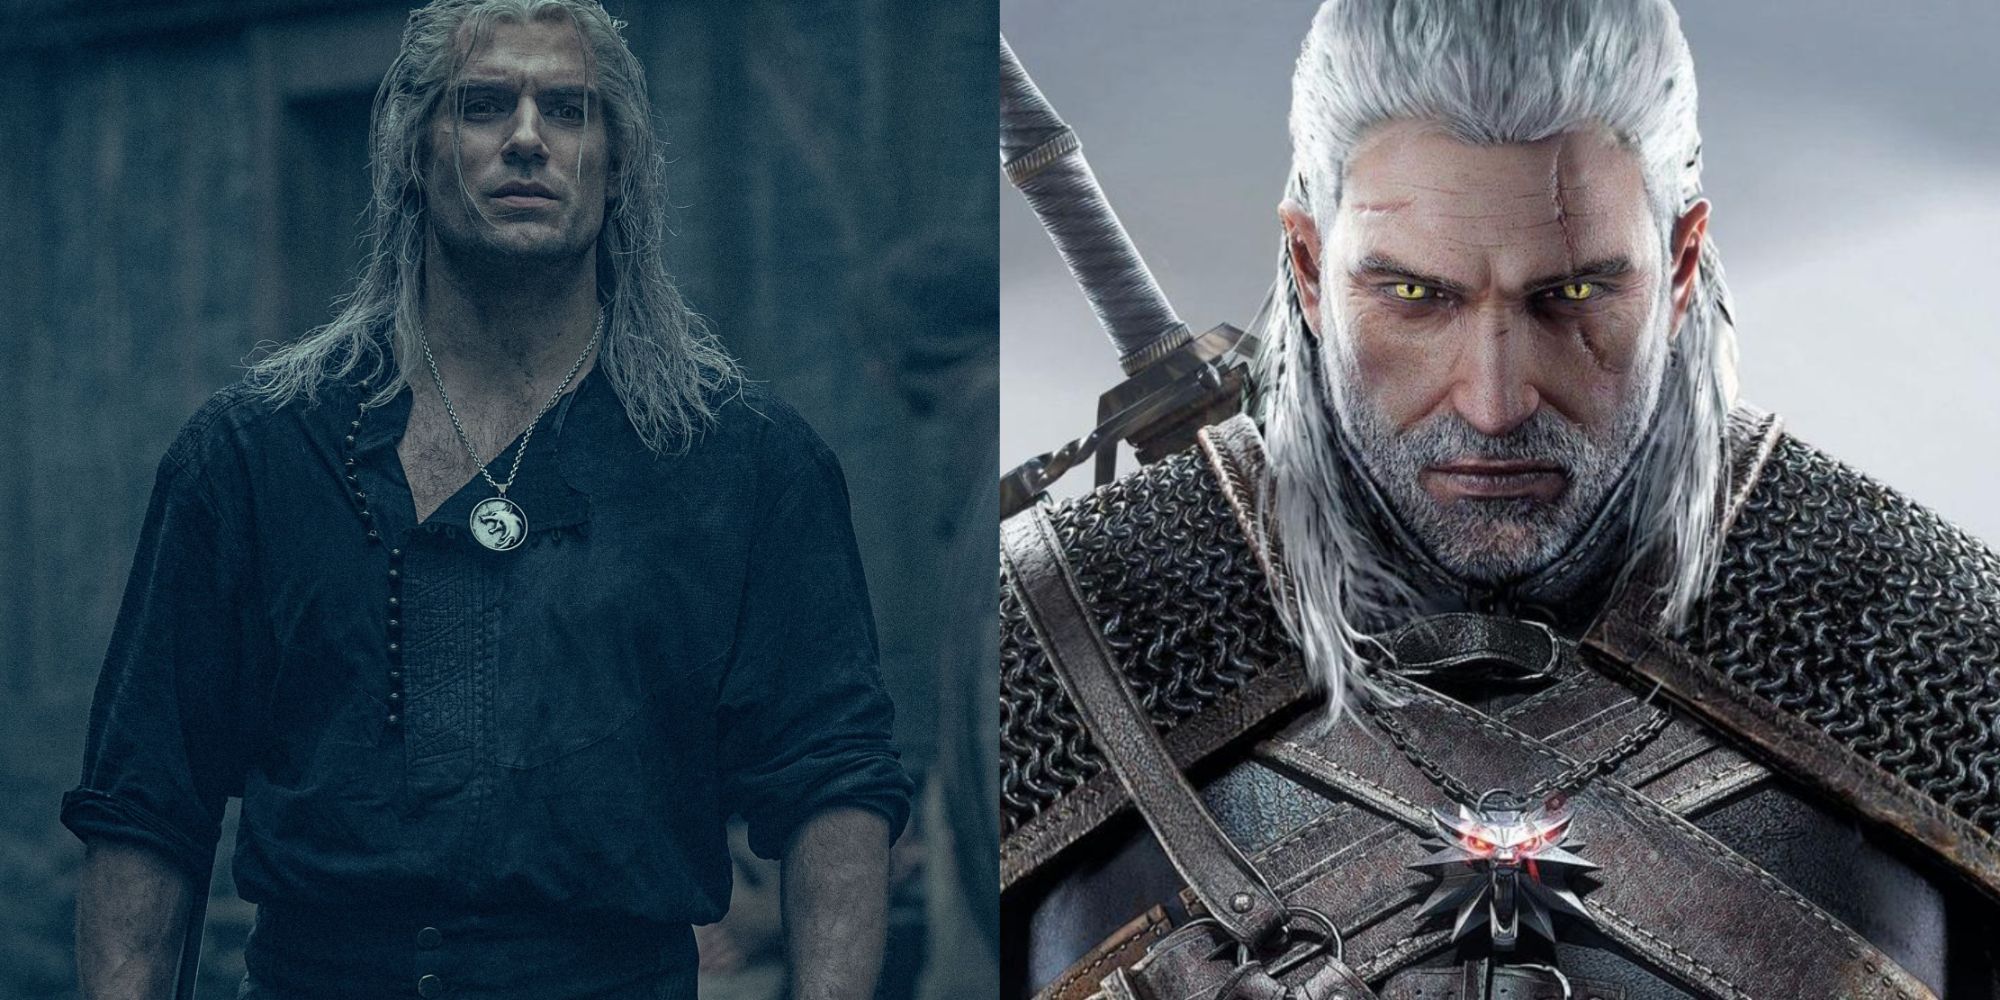 The Witcher: 9 Interesting Facts About Henry Cavill's Casting As Geralt of Rivia